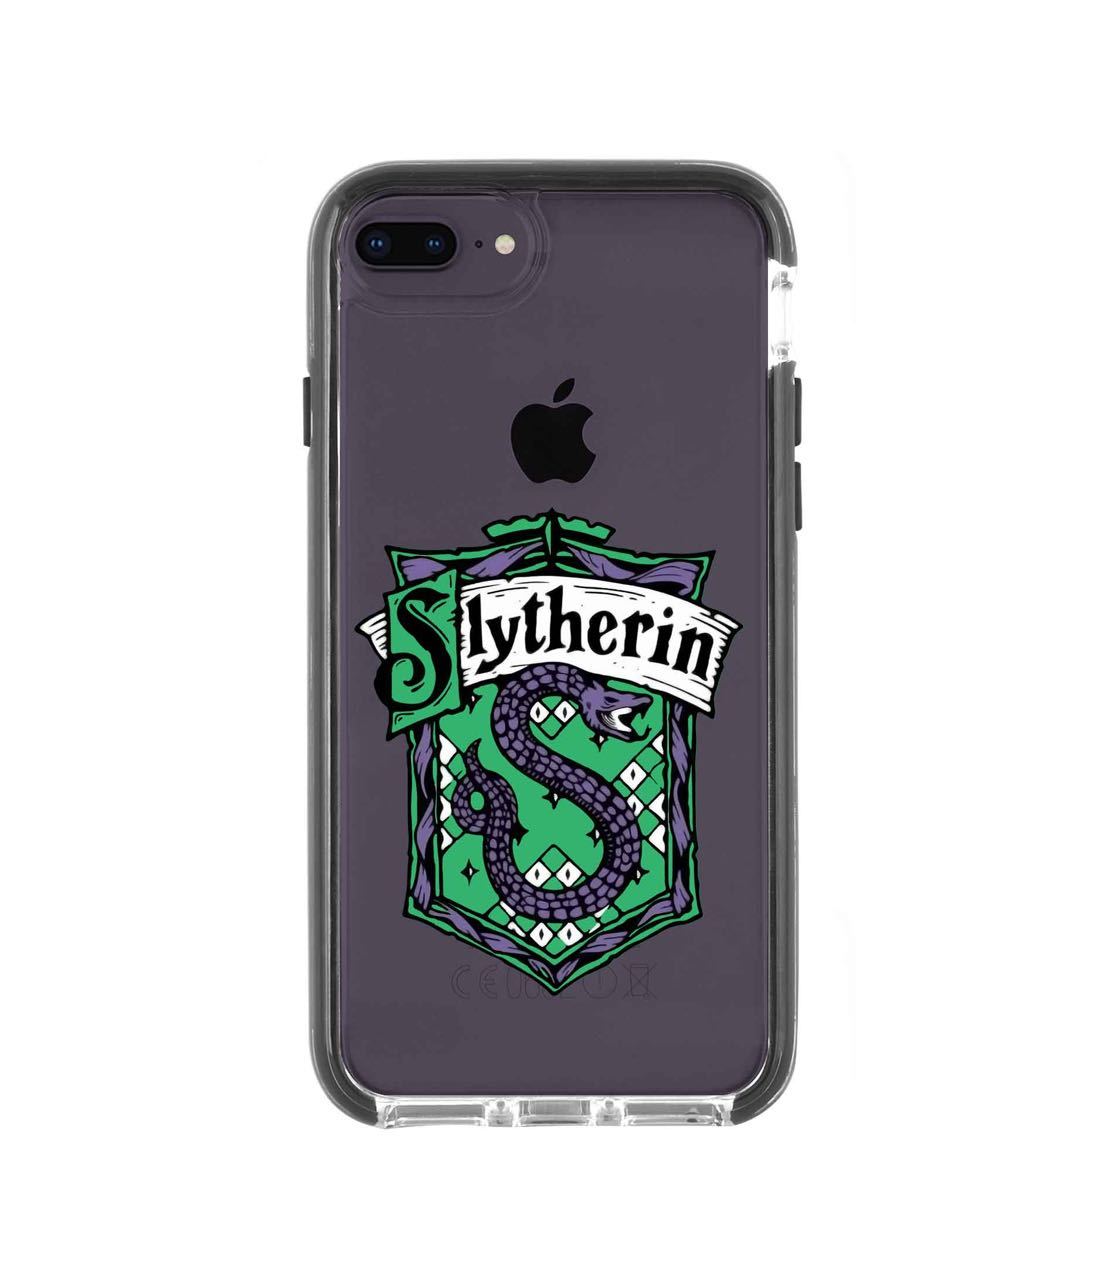 Crest Slytherin - Extreme Phone Case for iPhone 8 Plus